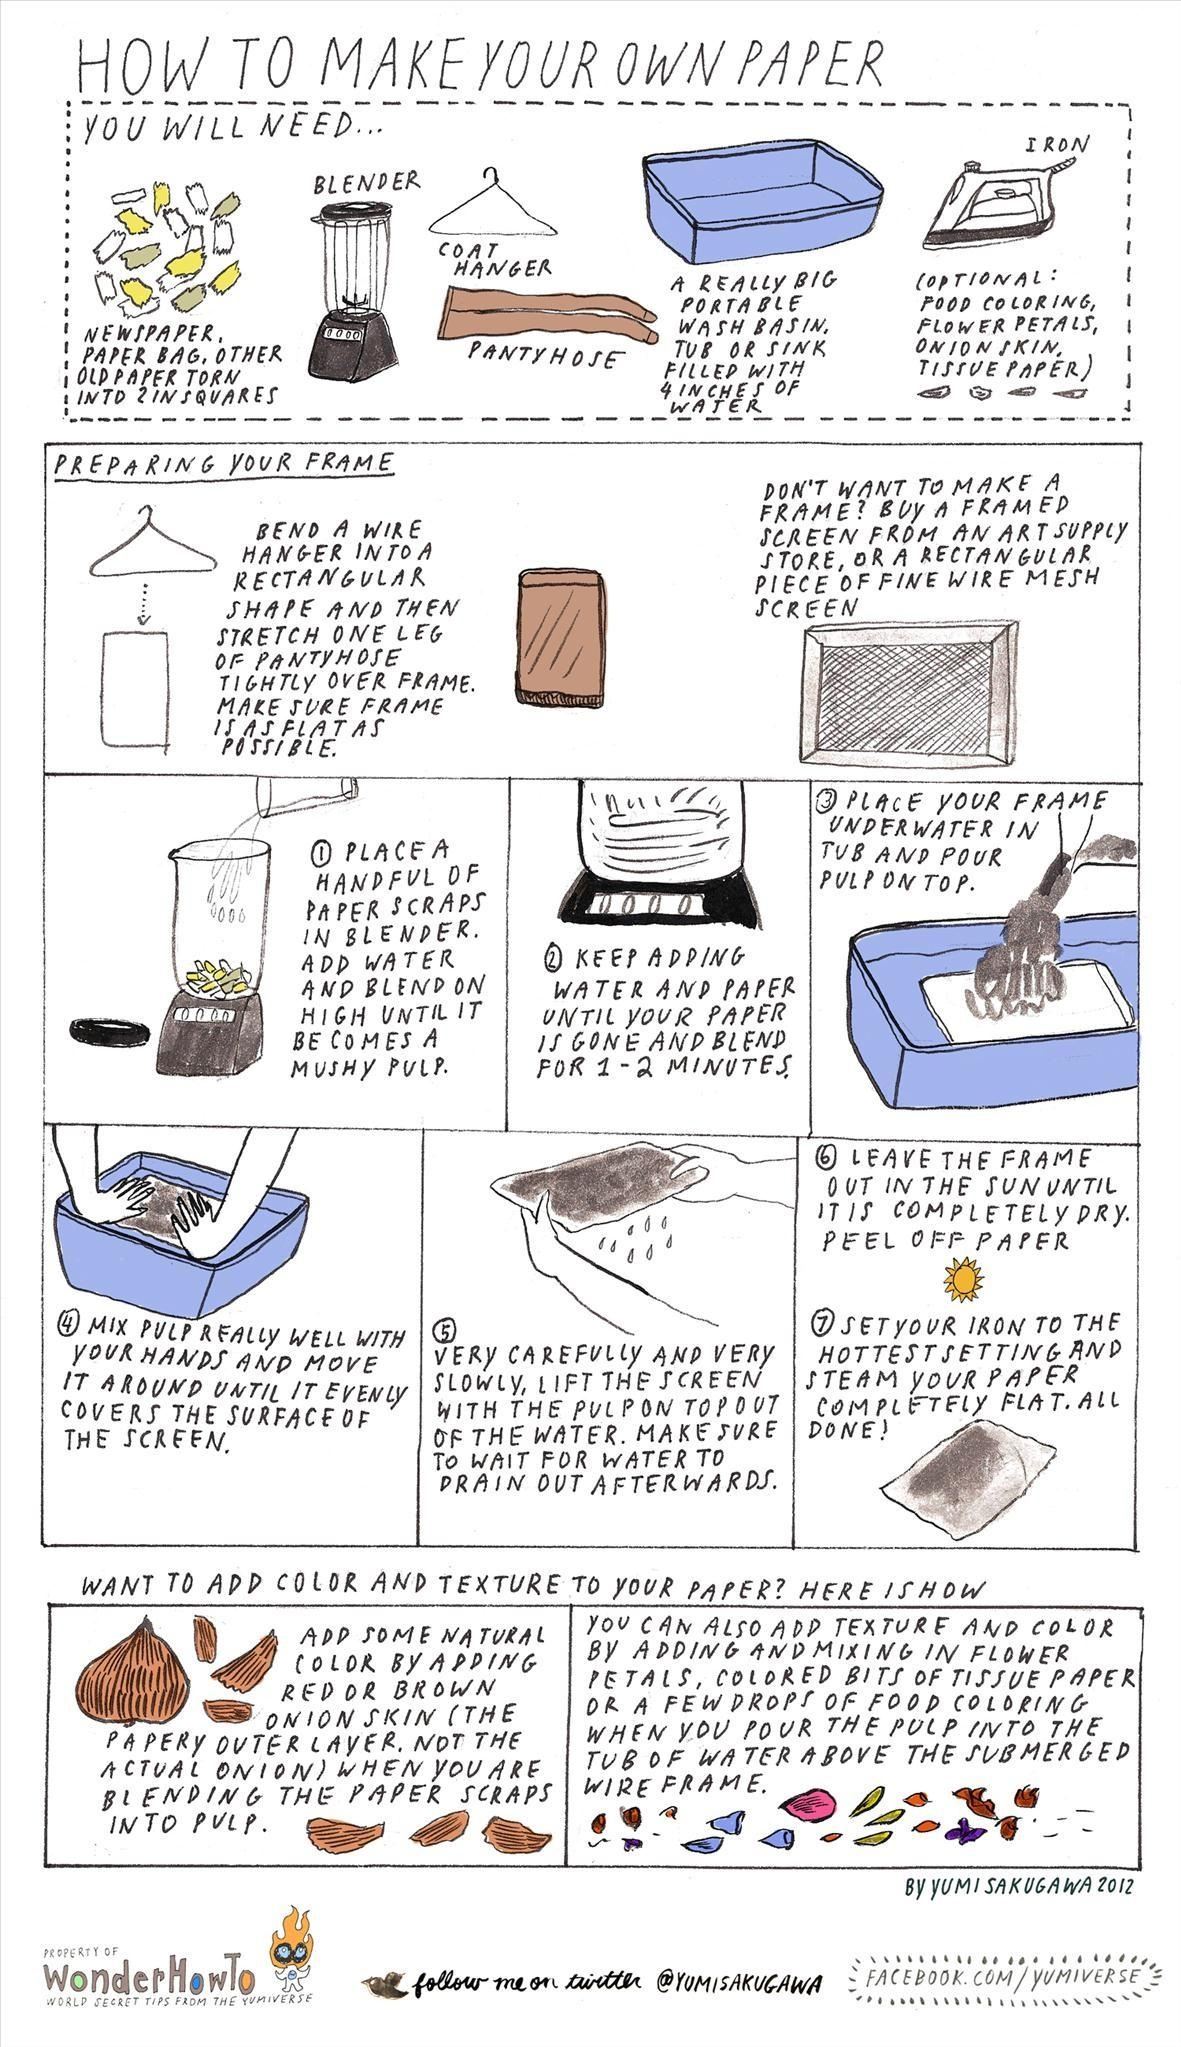 How to Make Your Own Recycled Paper at Home